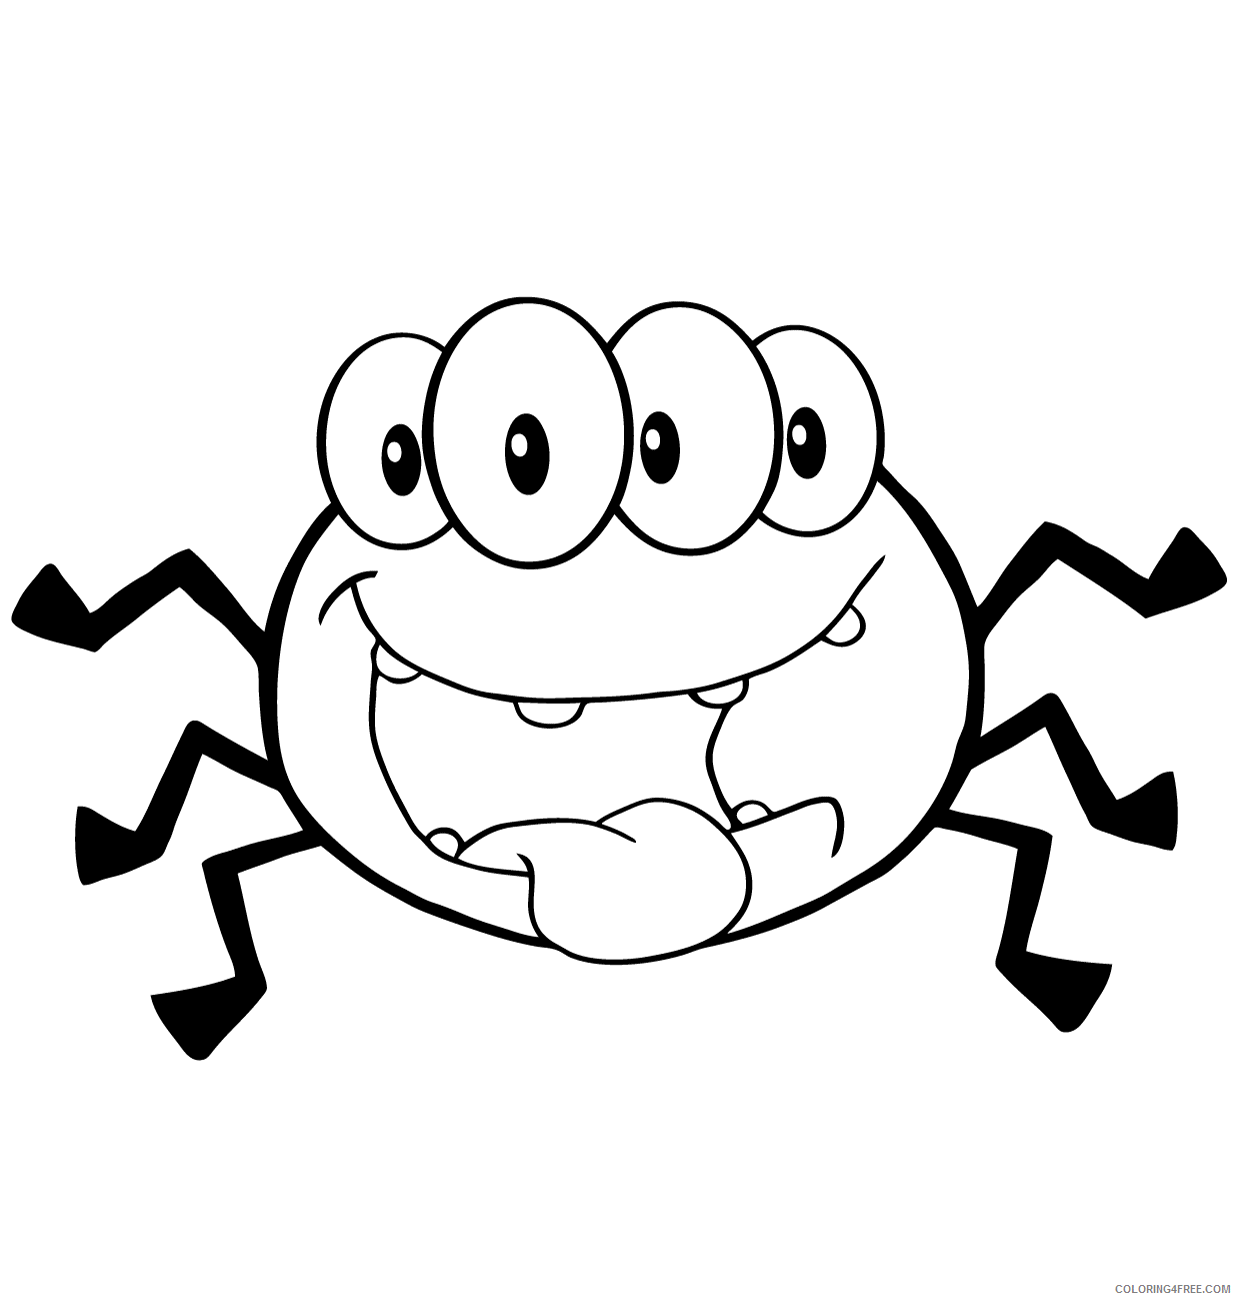 Spider Coloring Pages Animal Printable Sheets happy cartoon spider 2021 4624 Coloring4free